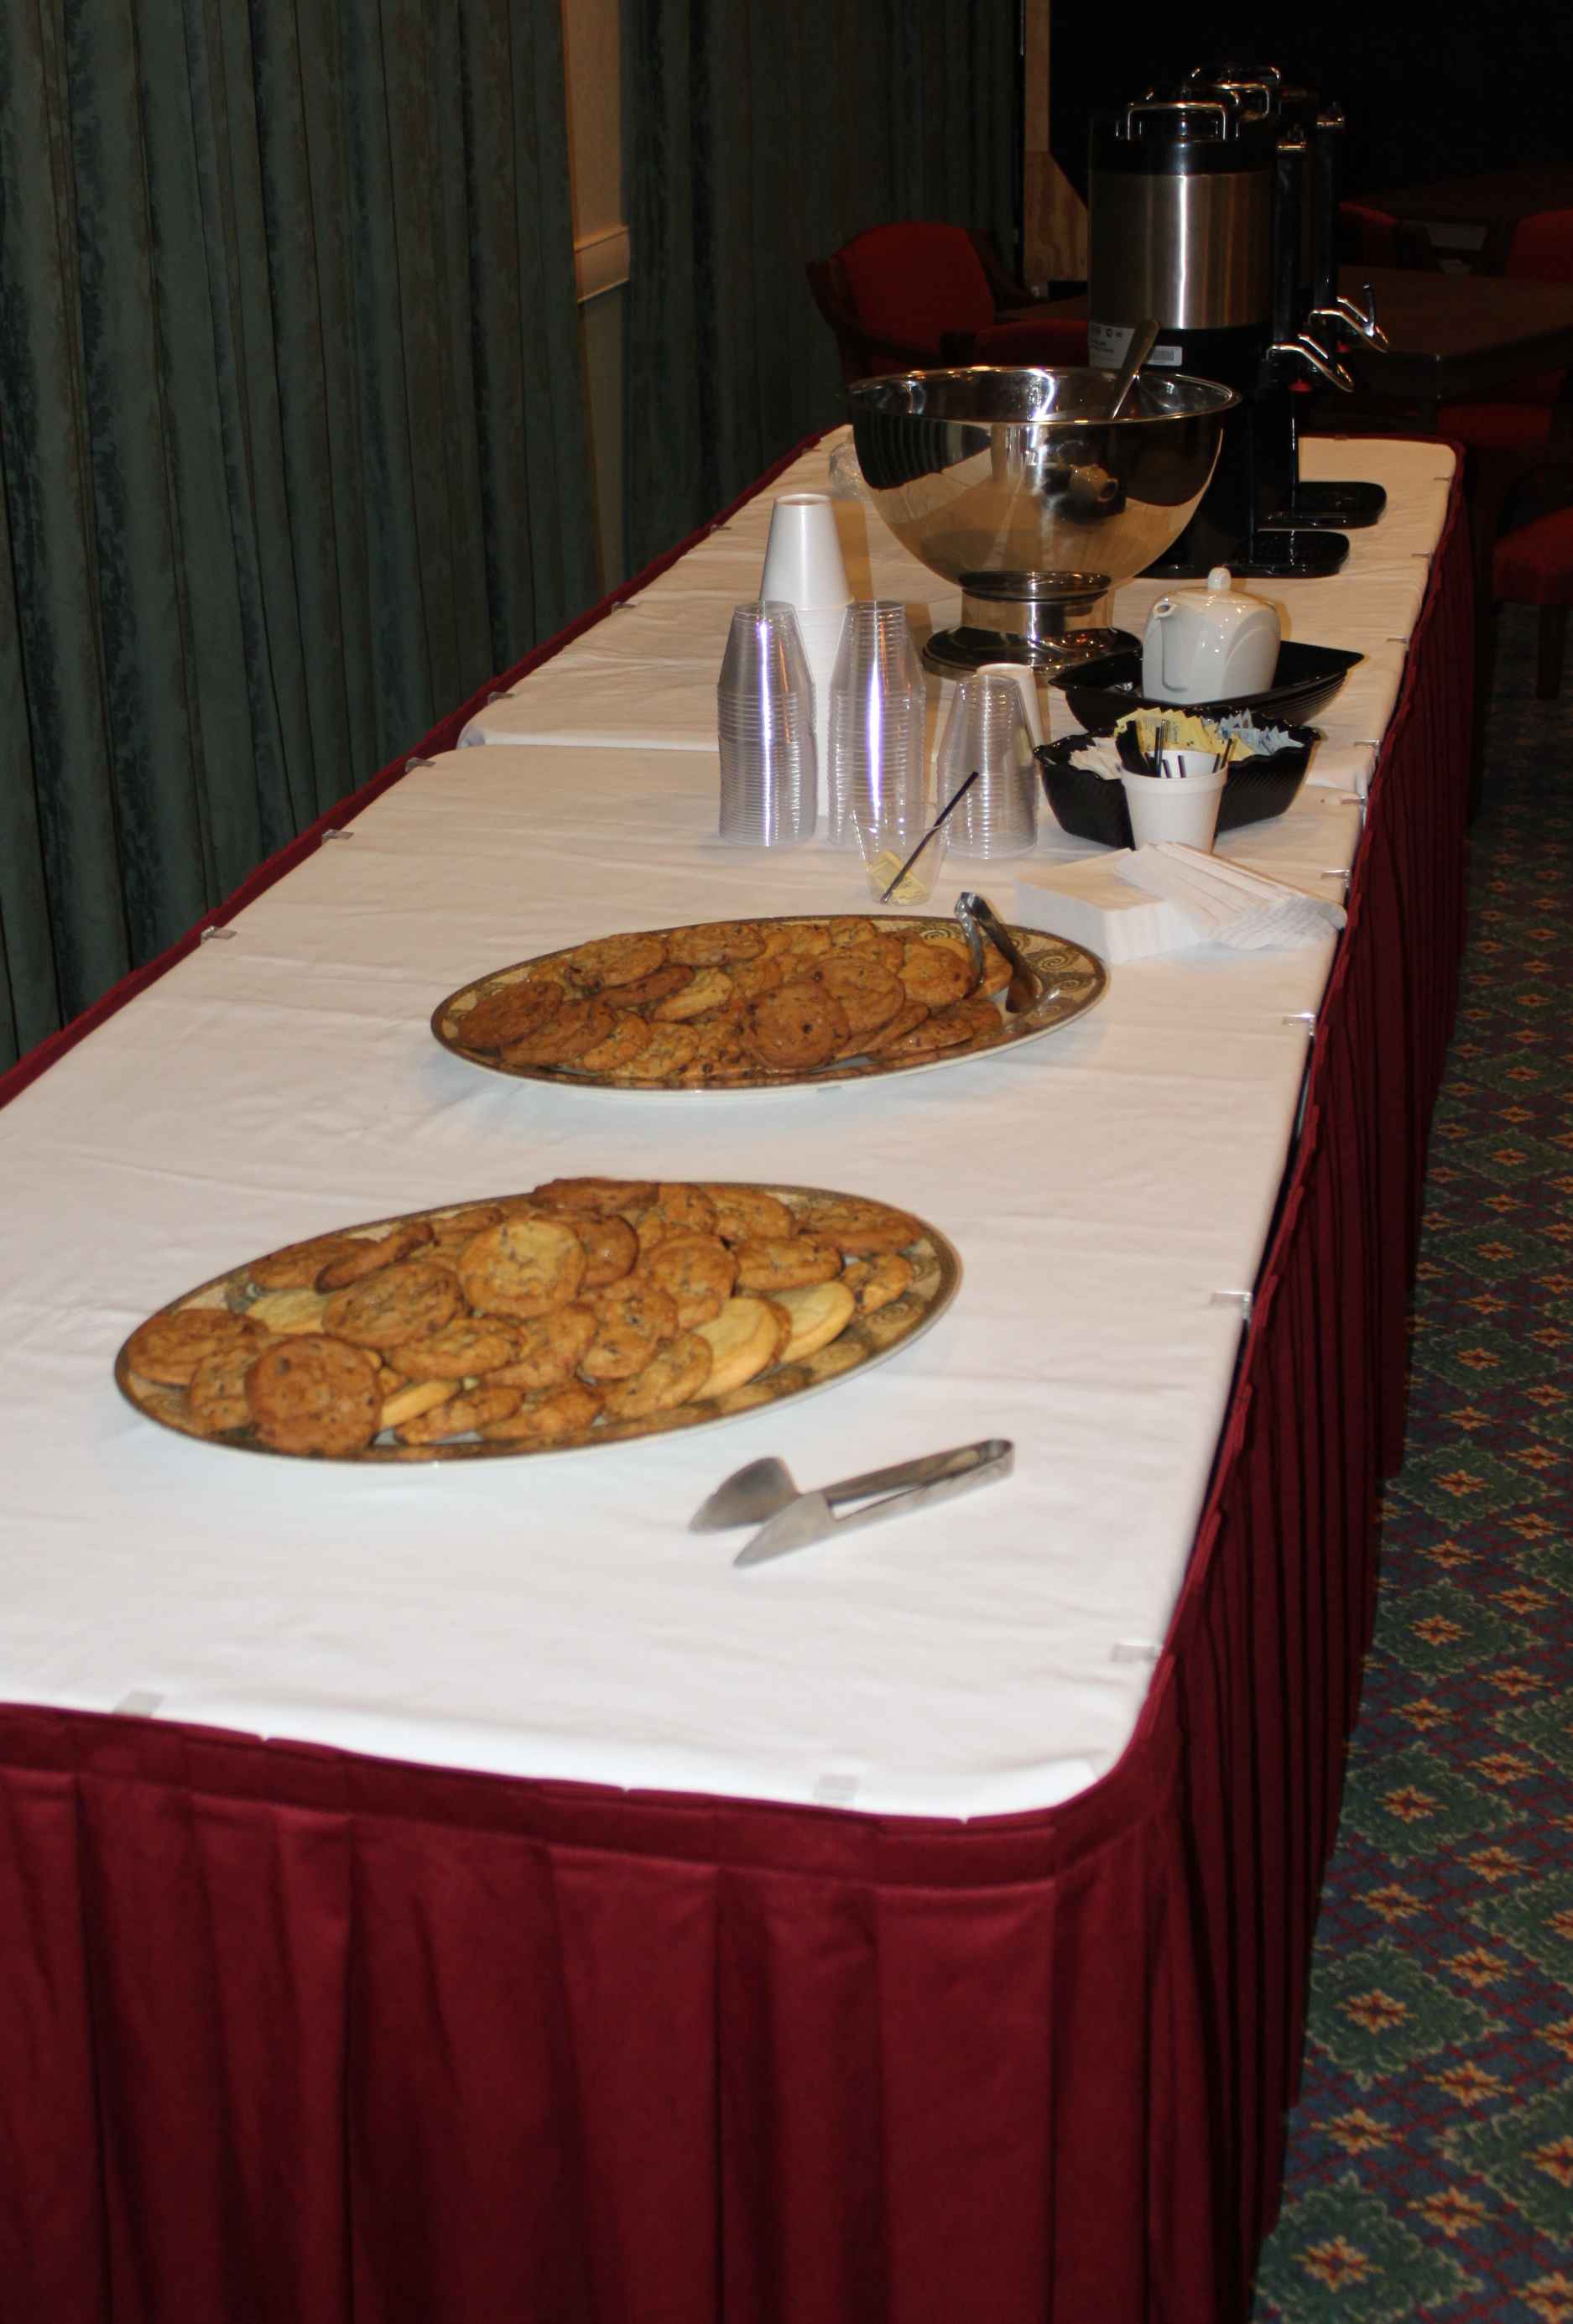 The Falcons Landing facility provided refreshments for the evening as part of thier community outreach program. The contestants and crowd appreciated the array of cookies, coffee, and punch.